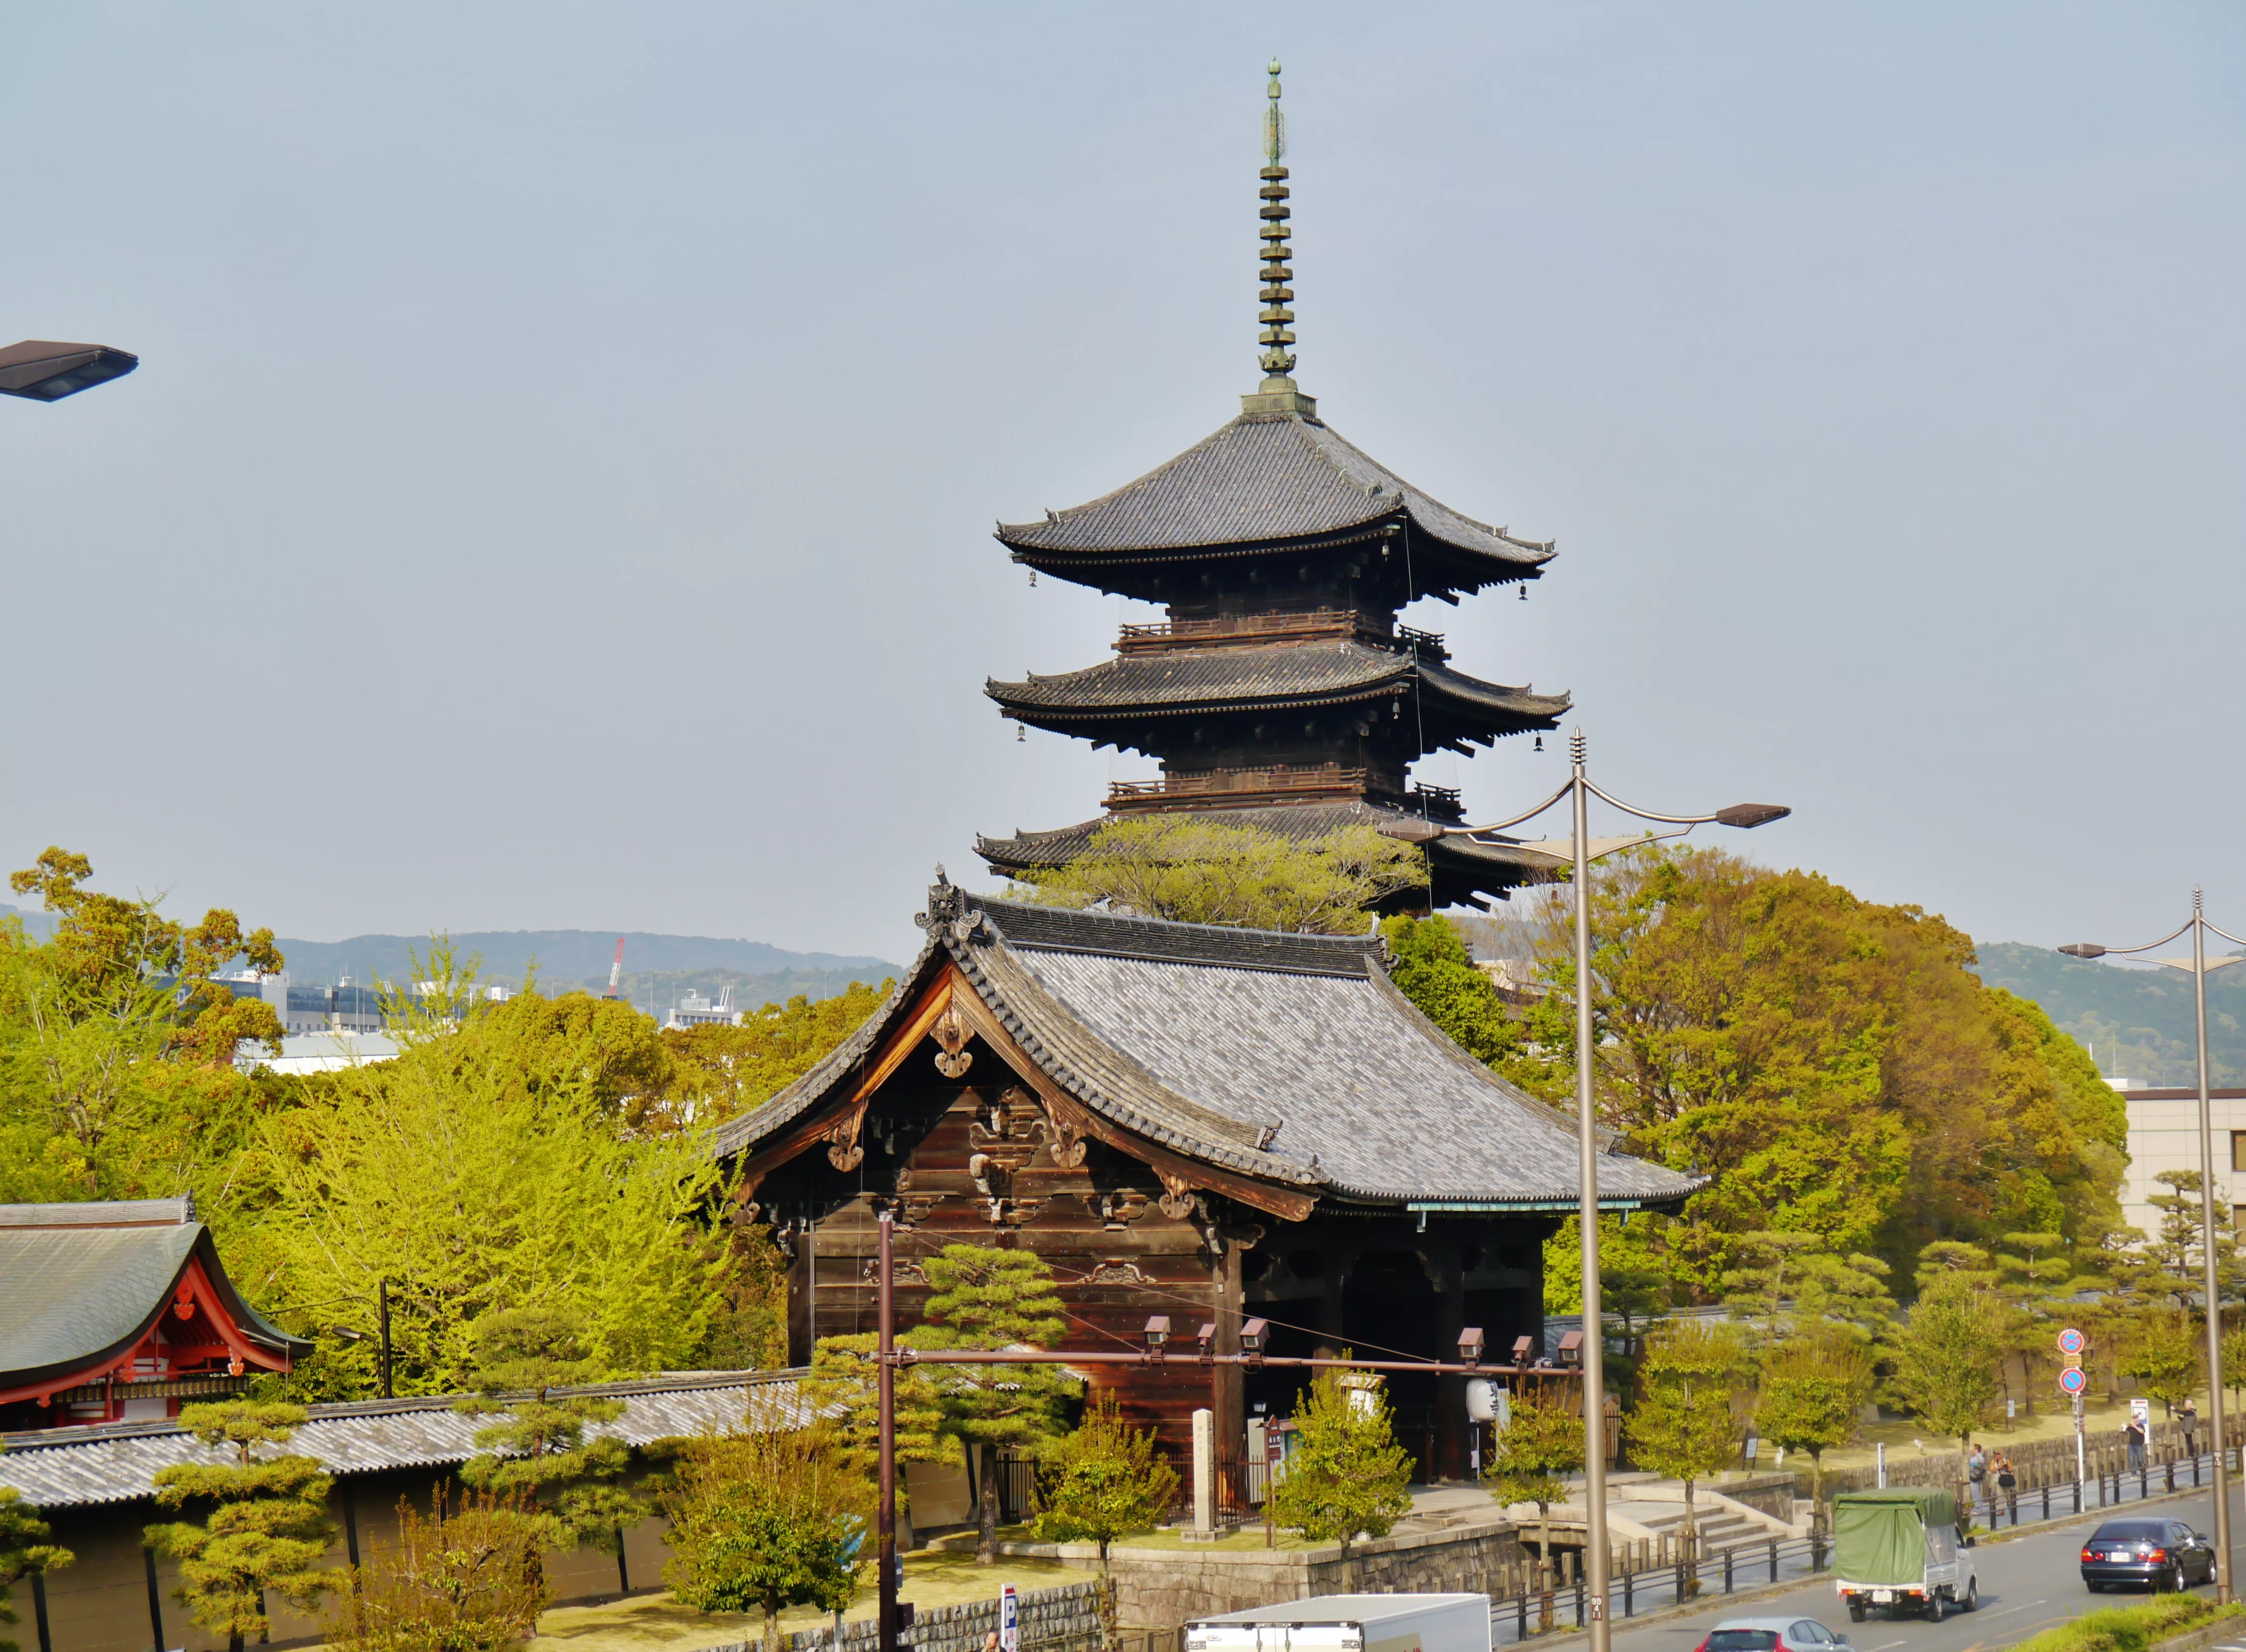 To-ji in Japan, East Asia | Architecture - Rated 3.7